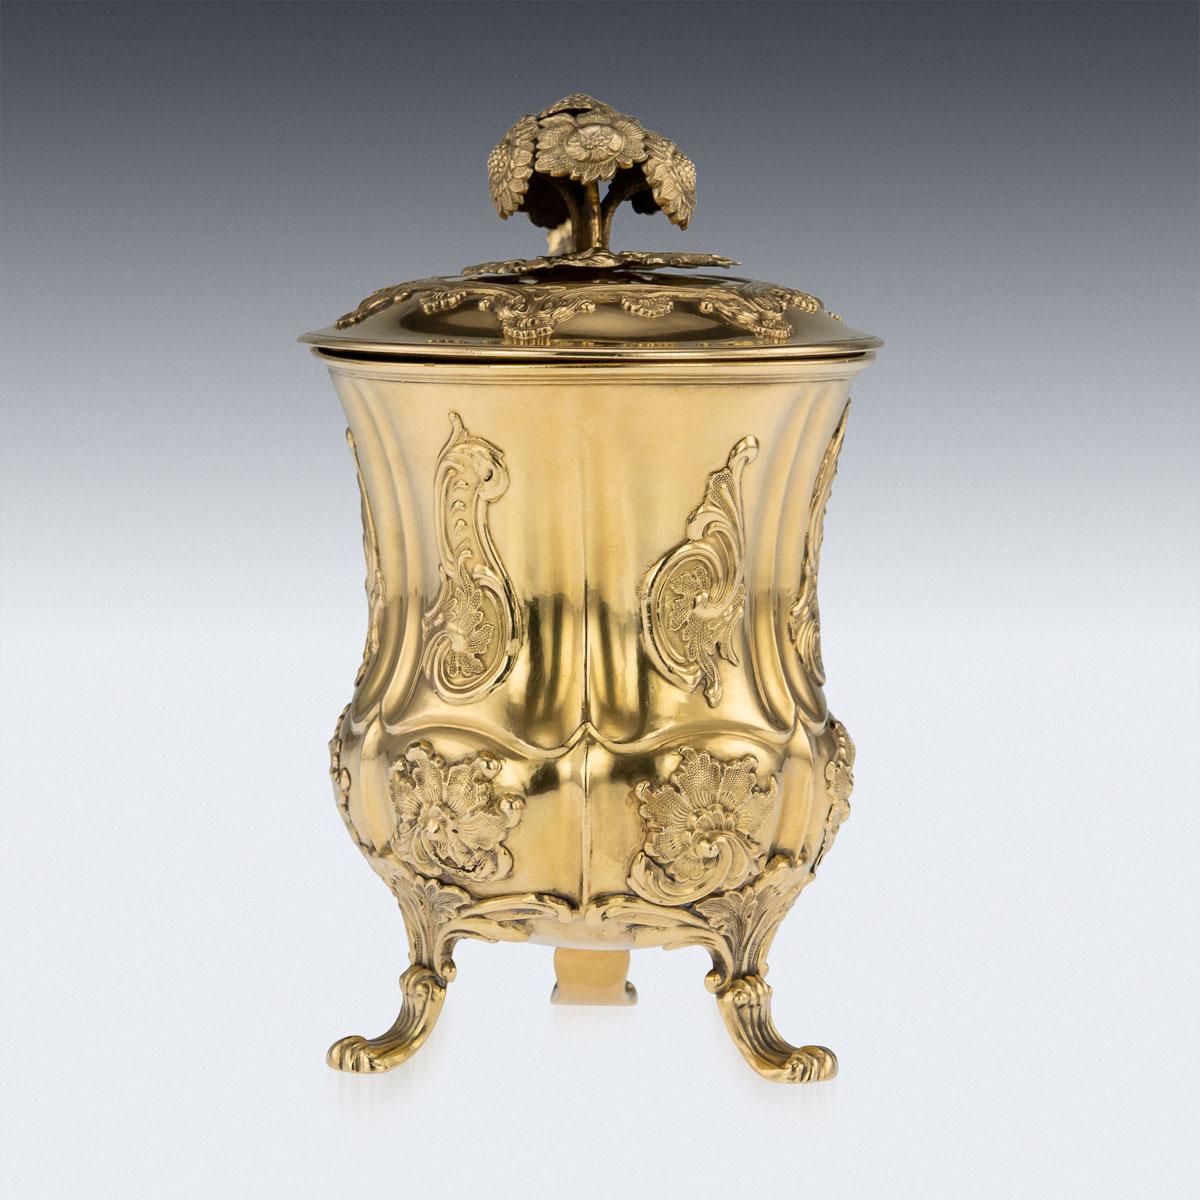 19th Century Russian Solid Silver-Gilt Cup and Cover, St-Petersburg, circa 1842 1